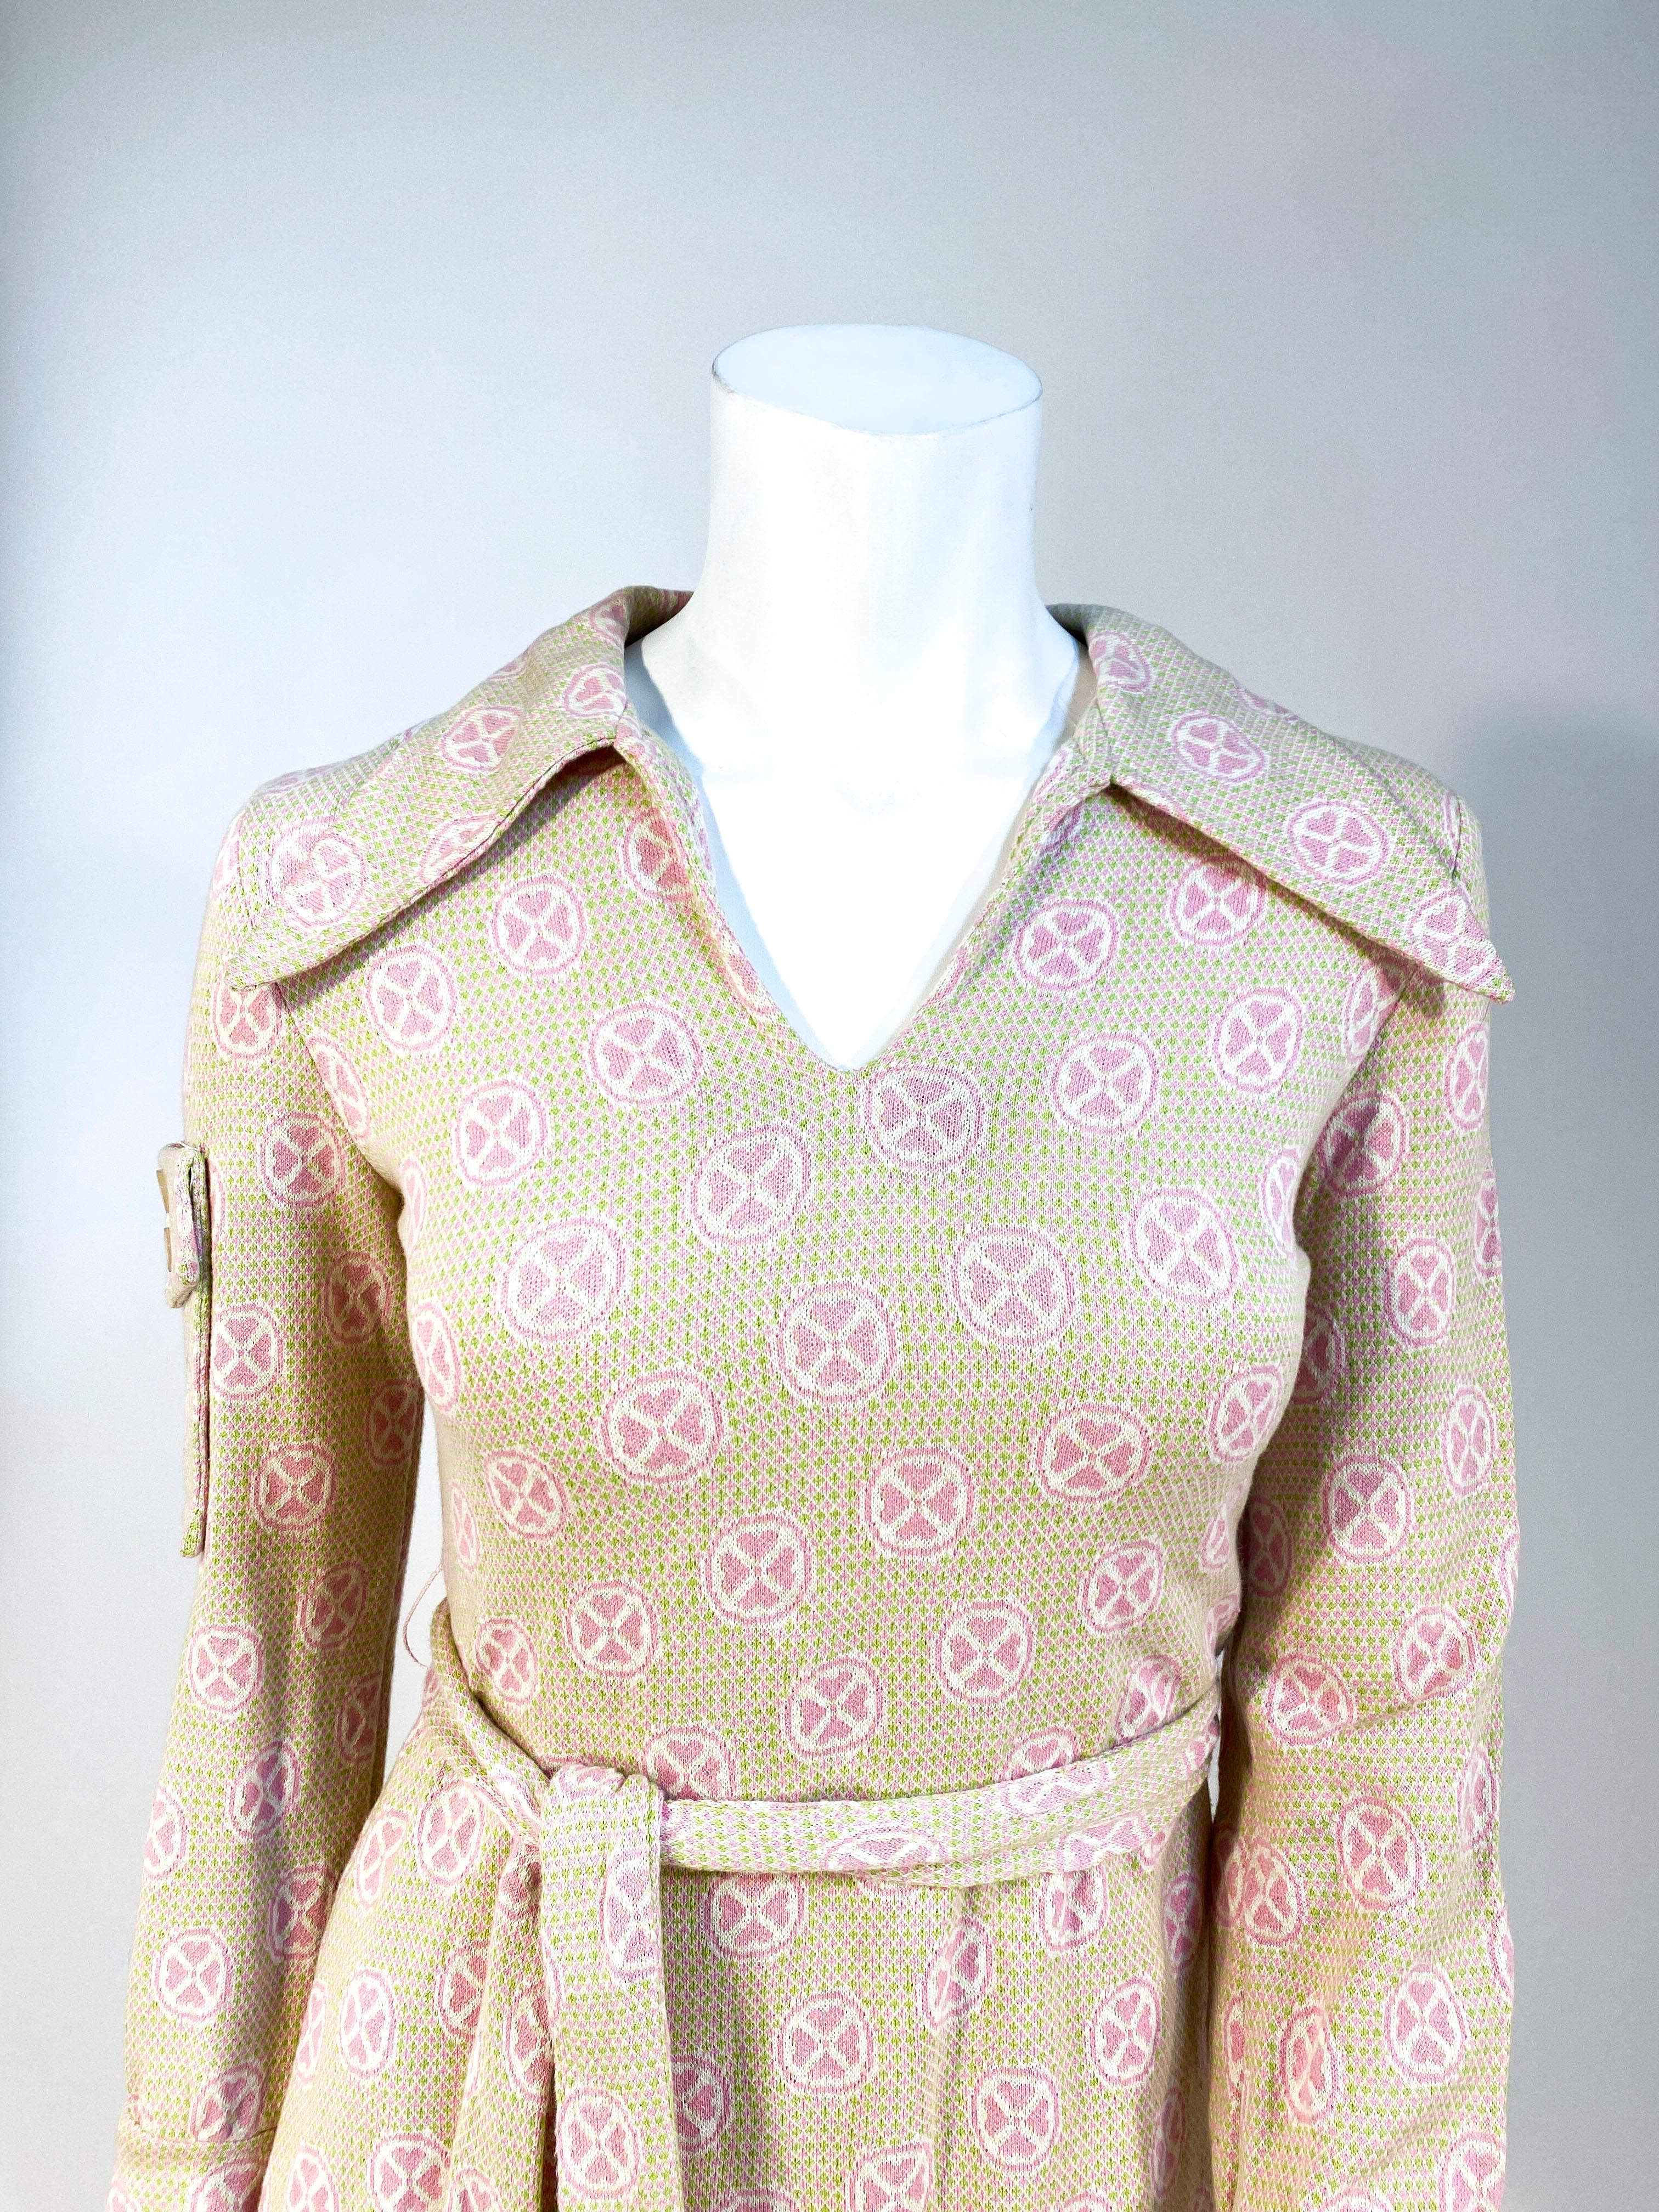 1970s very soft green and pink knit cotton mini dress with enlarged collar, full length sleeves, wide cuffs, matching sash belt, and a usable patch pocket on the top of the right sleeve. The back has a metal zipper closure with hooks and eyes.